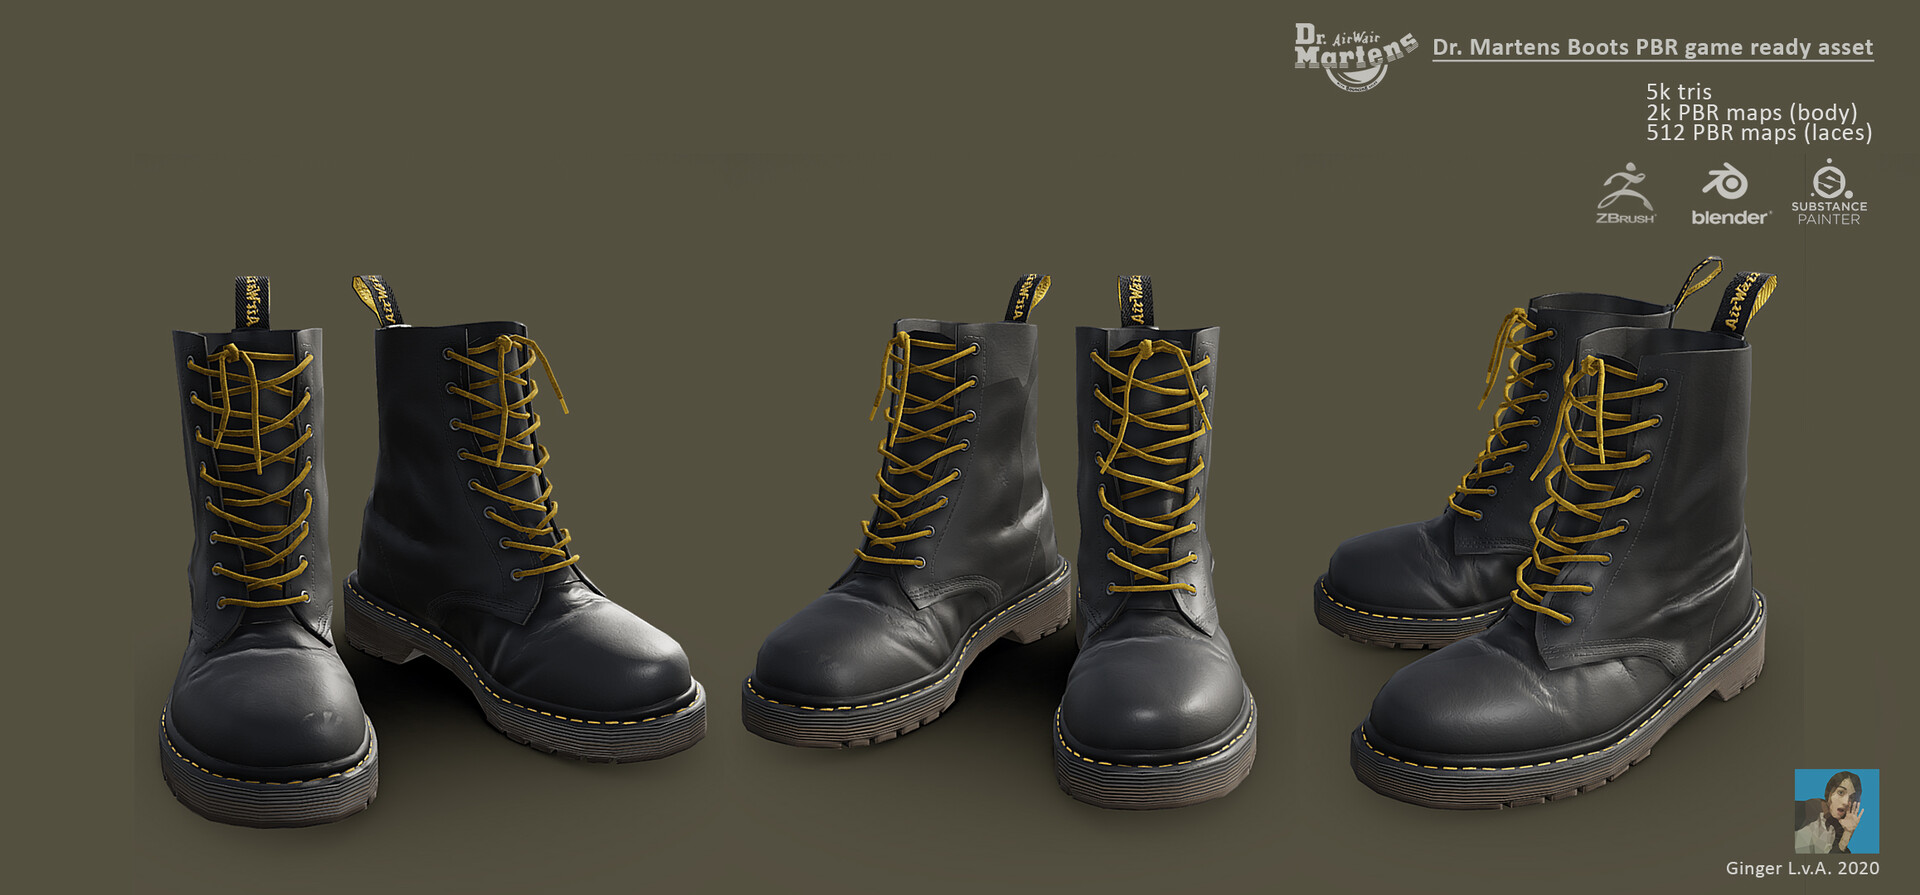 - Dr. Martens PBR game ready